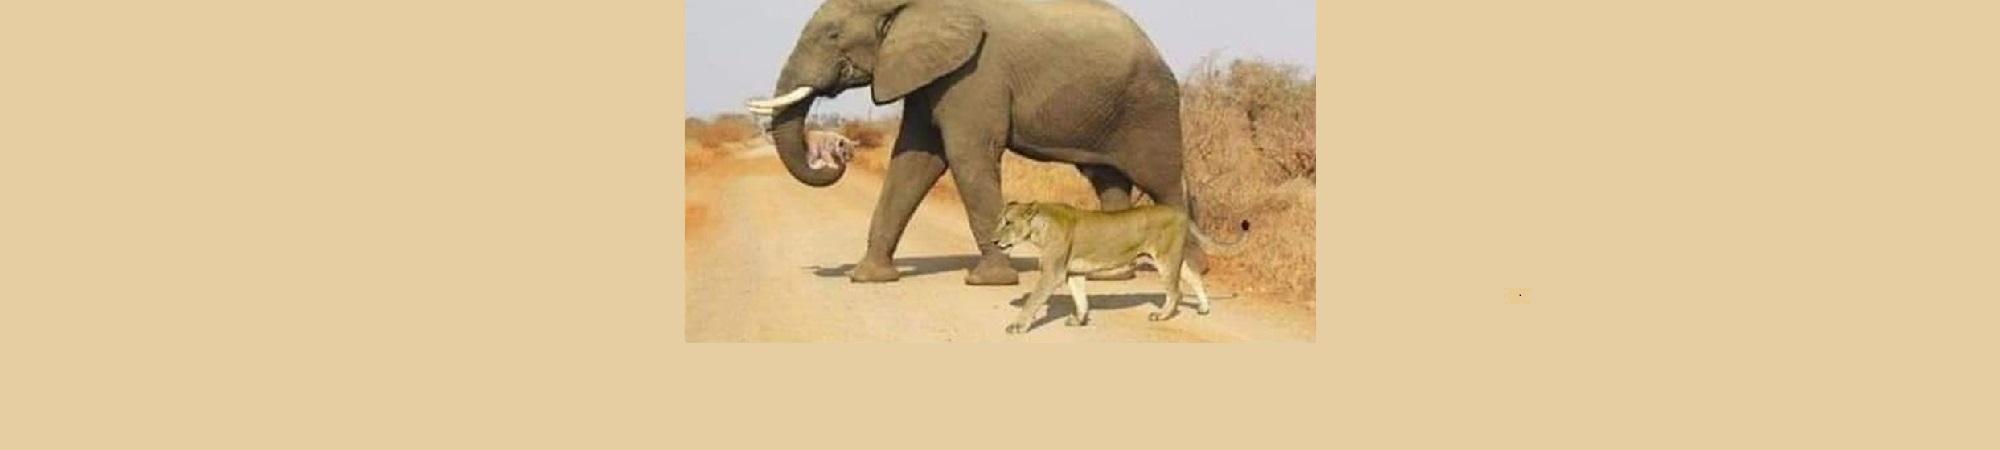 compassionate elephant carrying lion cub in her trunk, lioness walks along